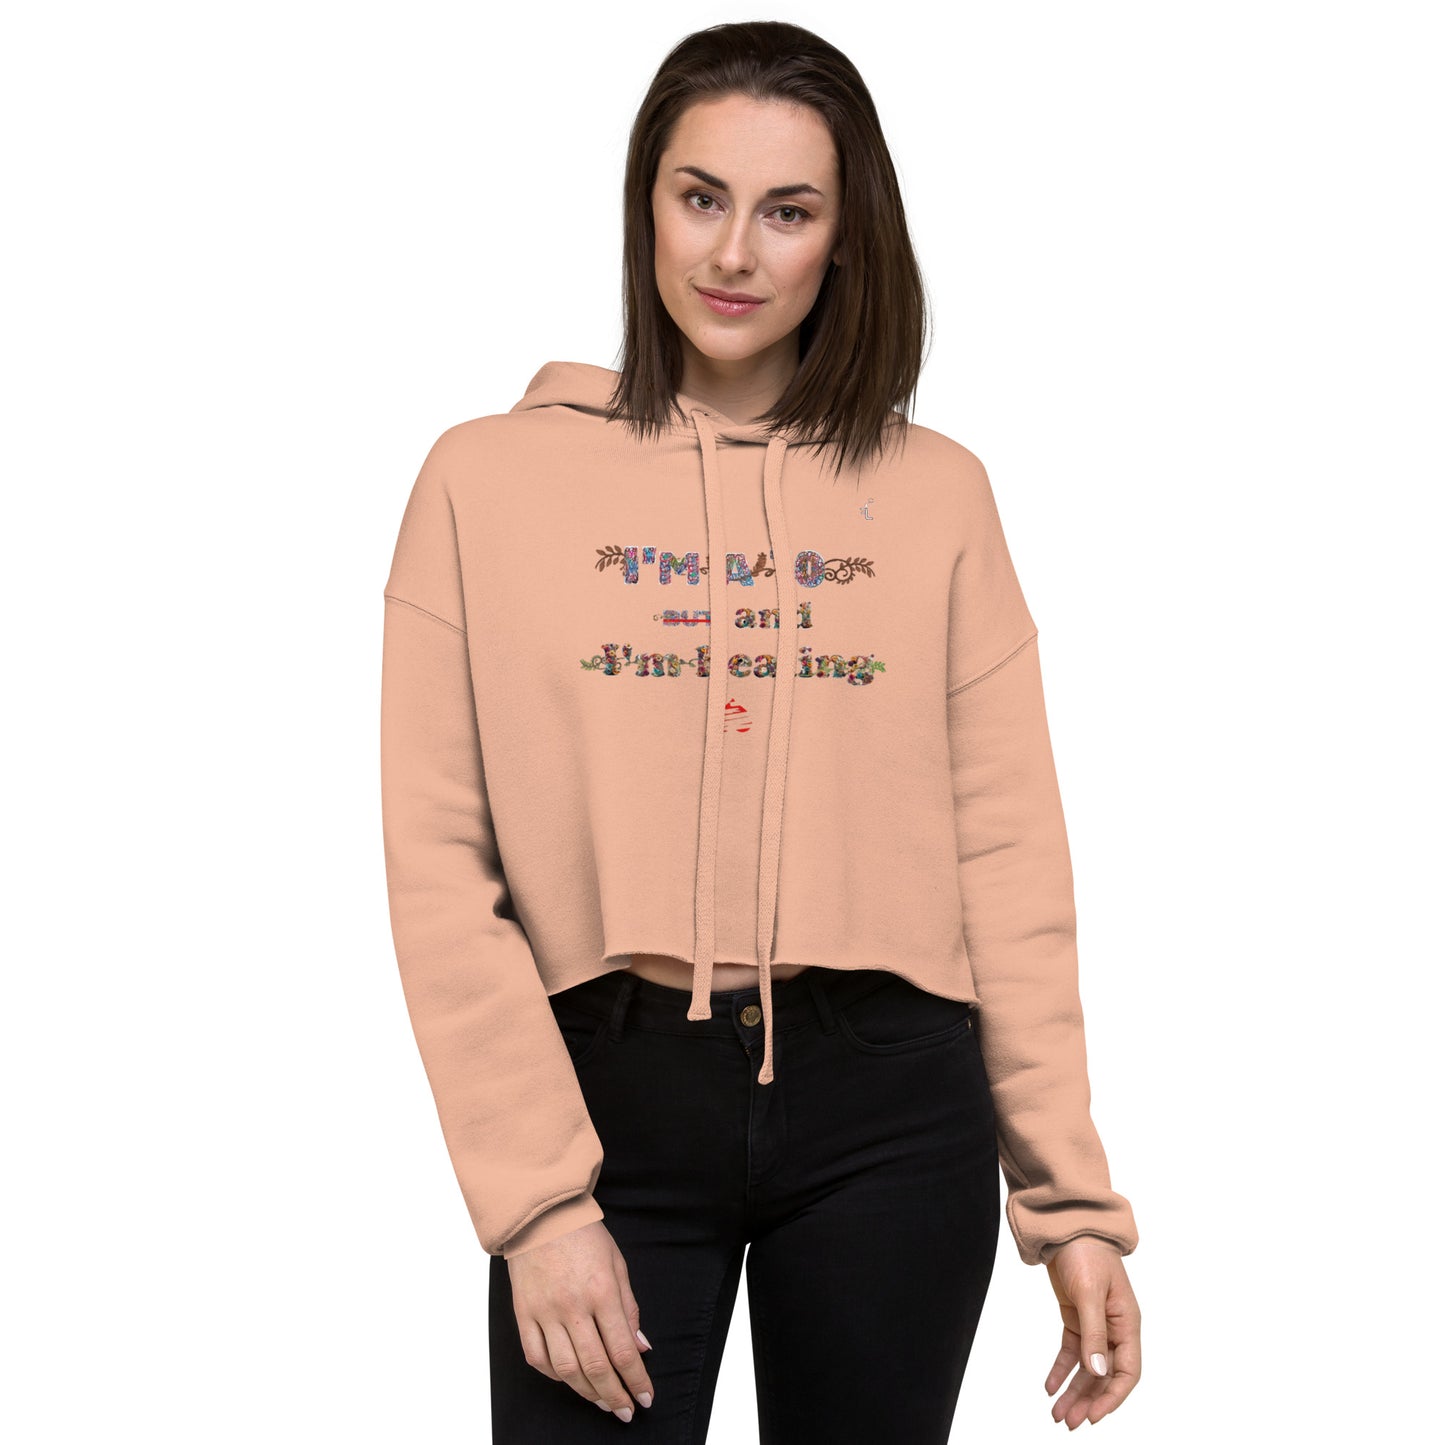 I'm a 10 and I'm Healing: Crop Hoodie (Flower Font)